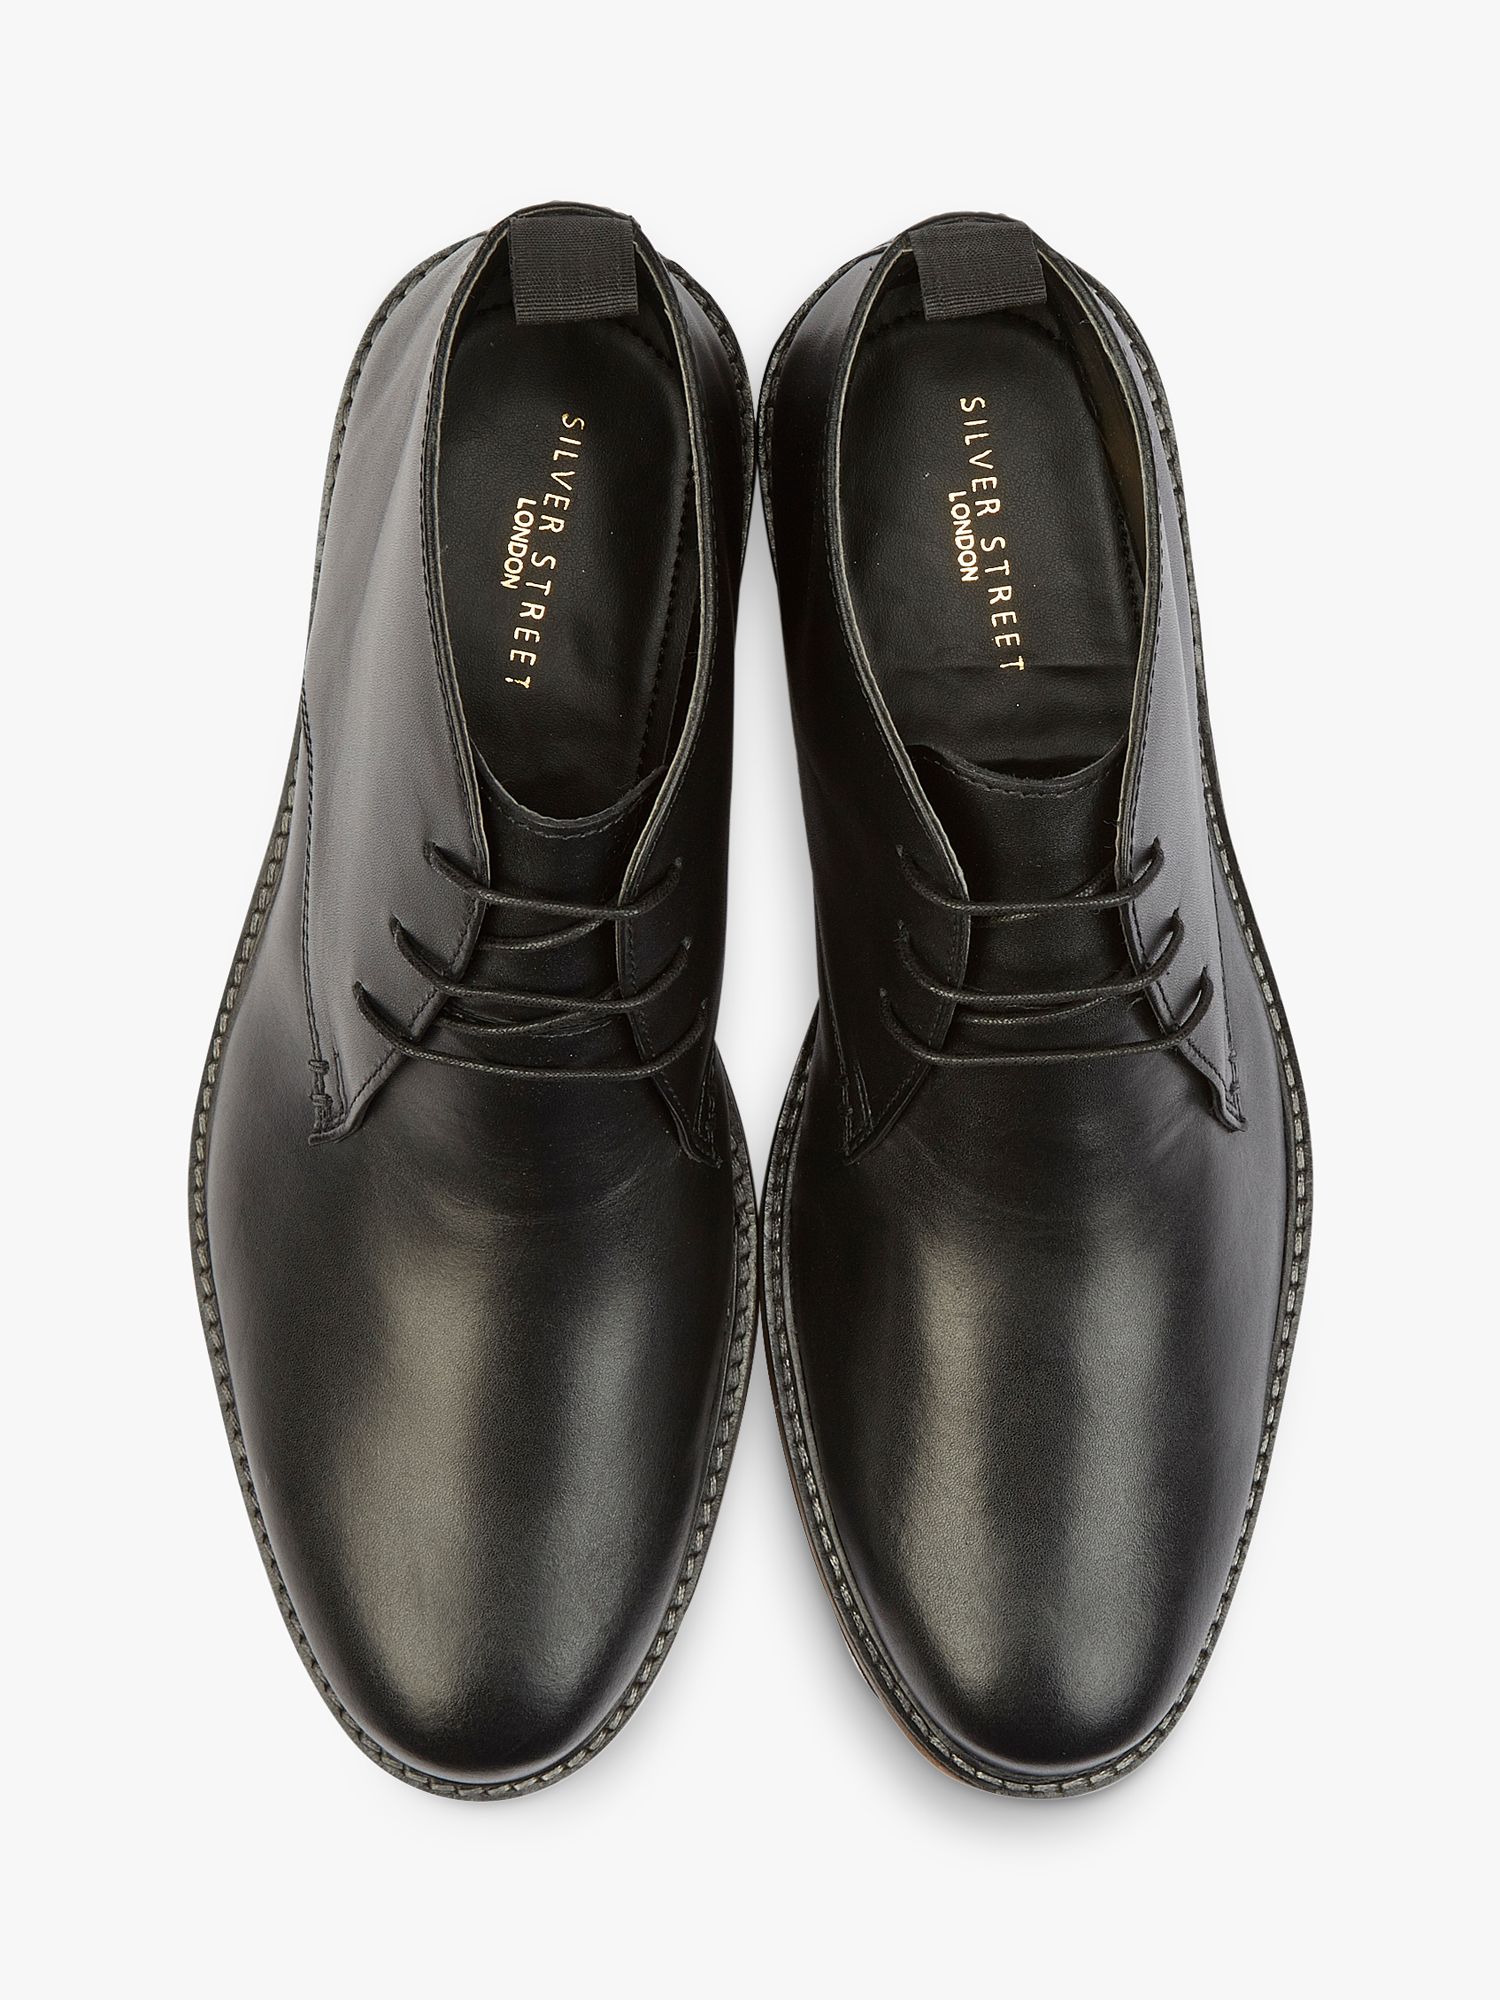 Silver Street London Ludgate Leather Chukka Boots, Black at John Lewis ...